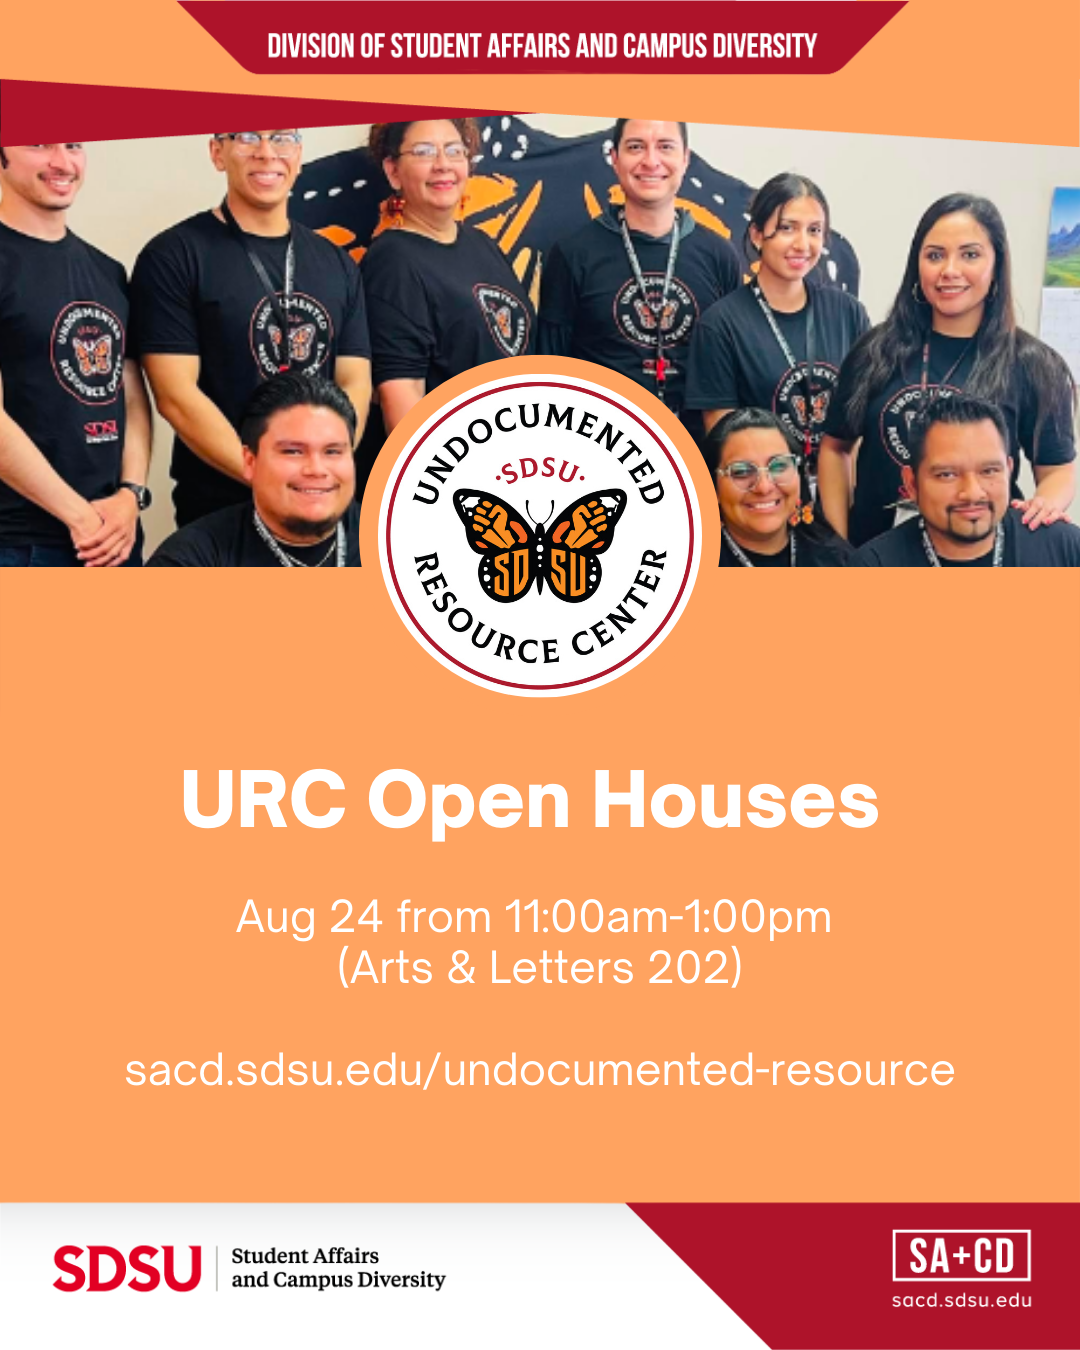 Undocumented Resource Center Open House Aug 24, 11am-1p at Arts & Letters 202